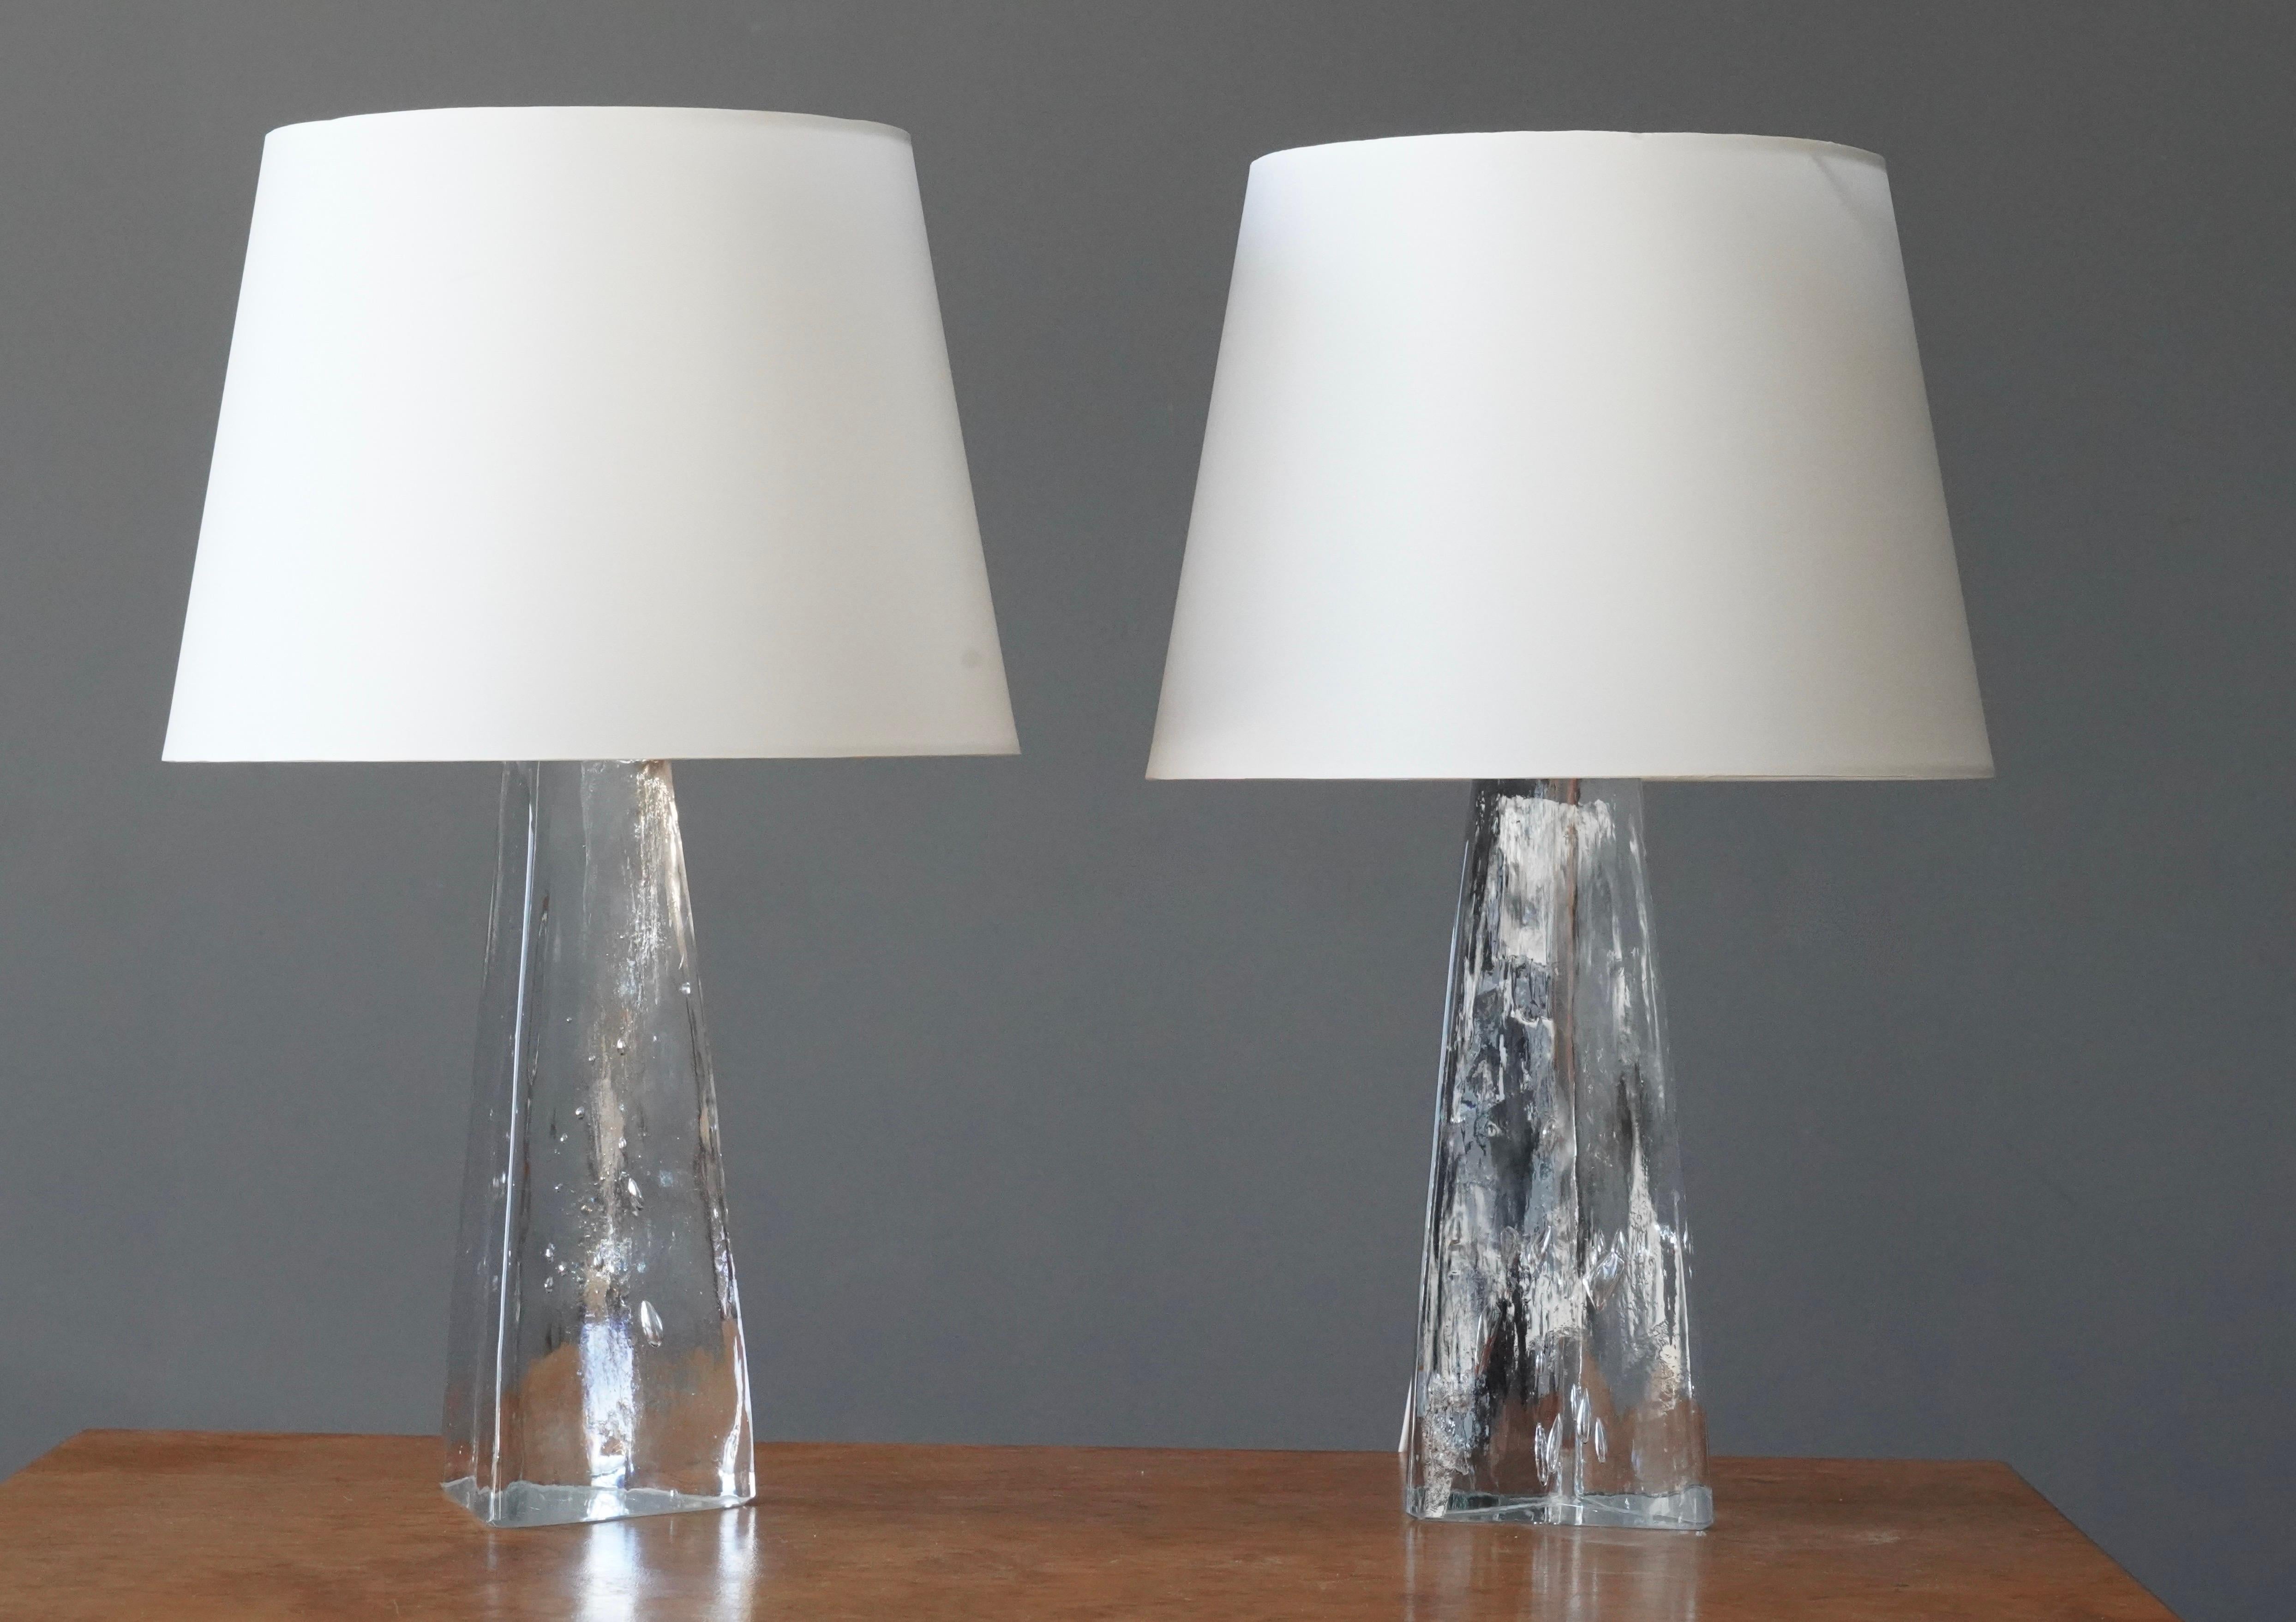 A pair of organic table lamps. Designed by Folke Walving for Målerås, Sweden, 1960s. Signed.

Dimensions listed are without shade. 
Dimensions with shade: height is 19.25 inches, width is 12 inches.
Dimensions of shade: top diameter is 9 inches,